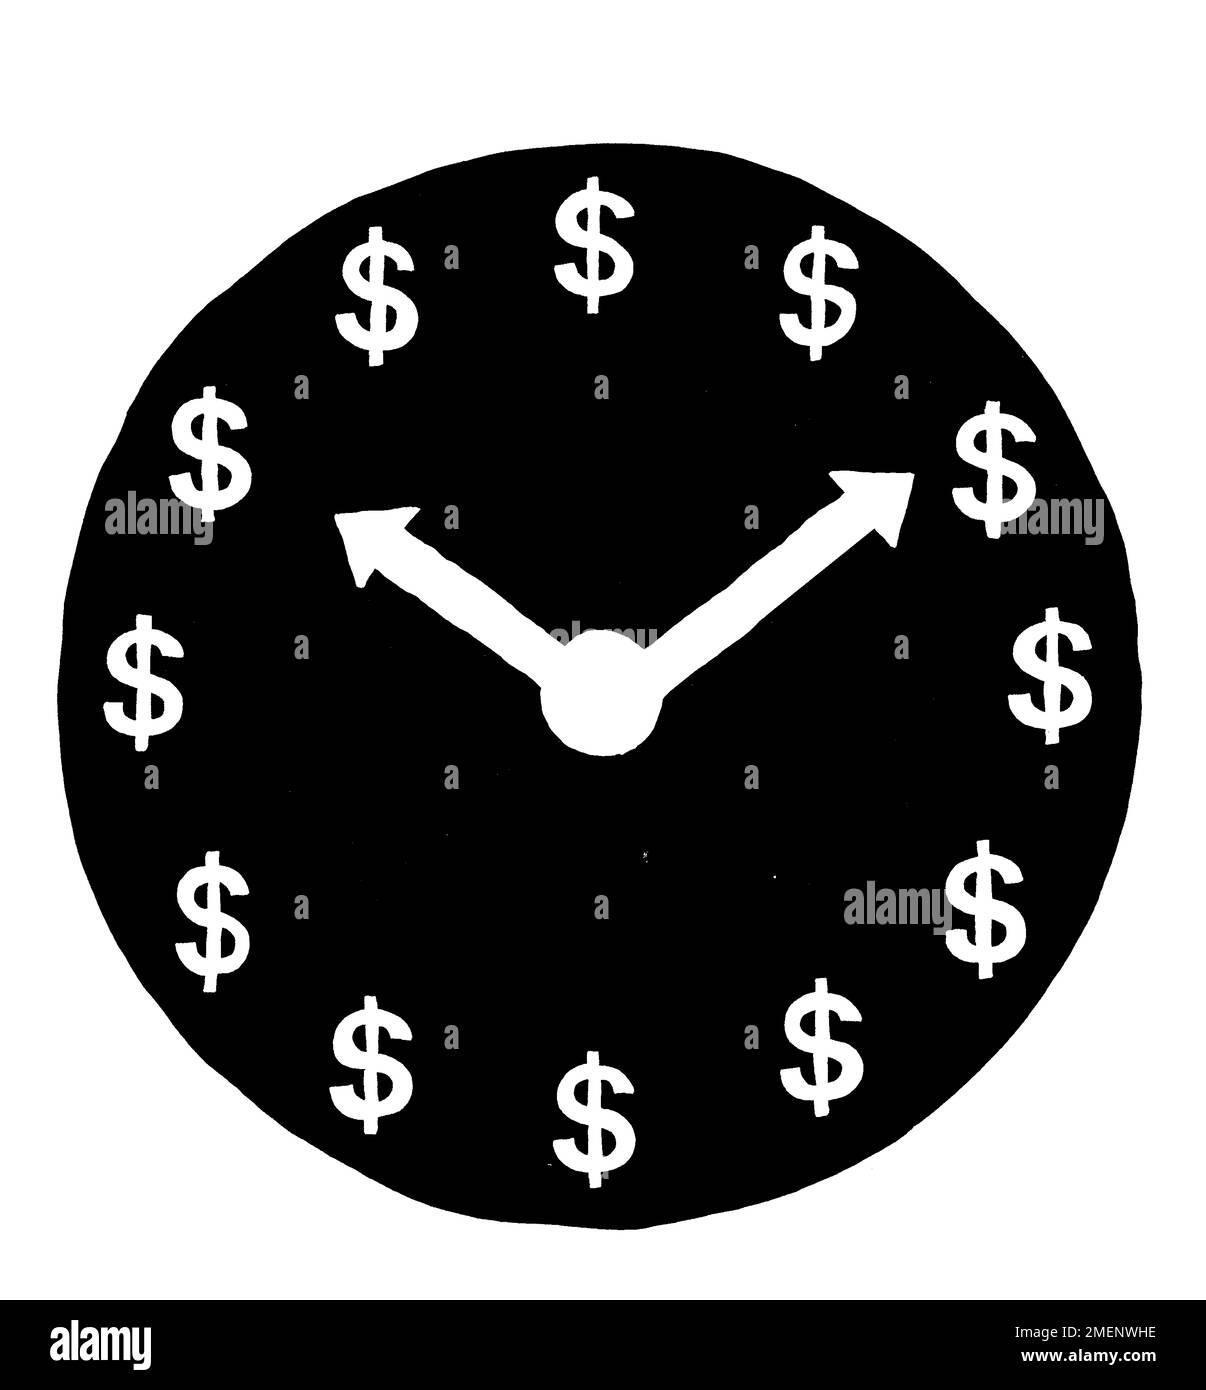 Black and white illustration of clock face with dollar signs instead of numbers Stock Photo